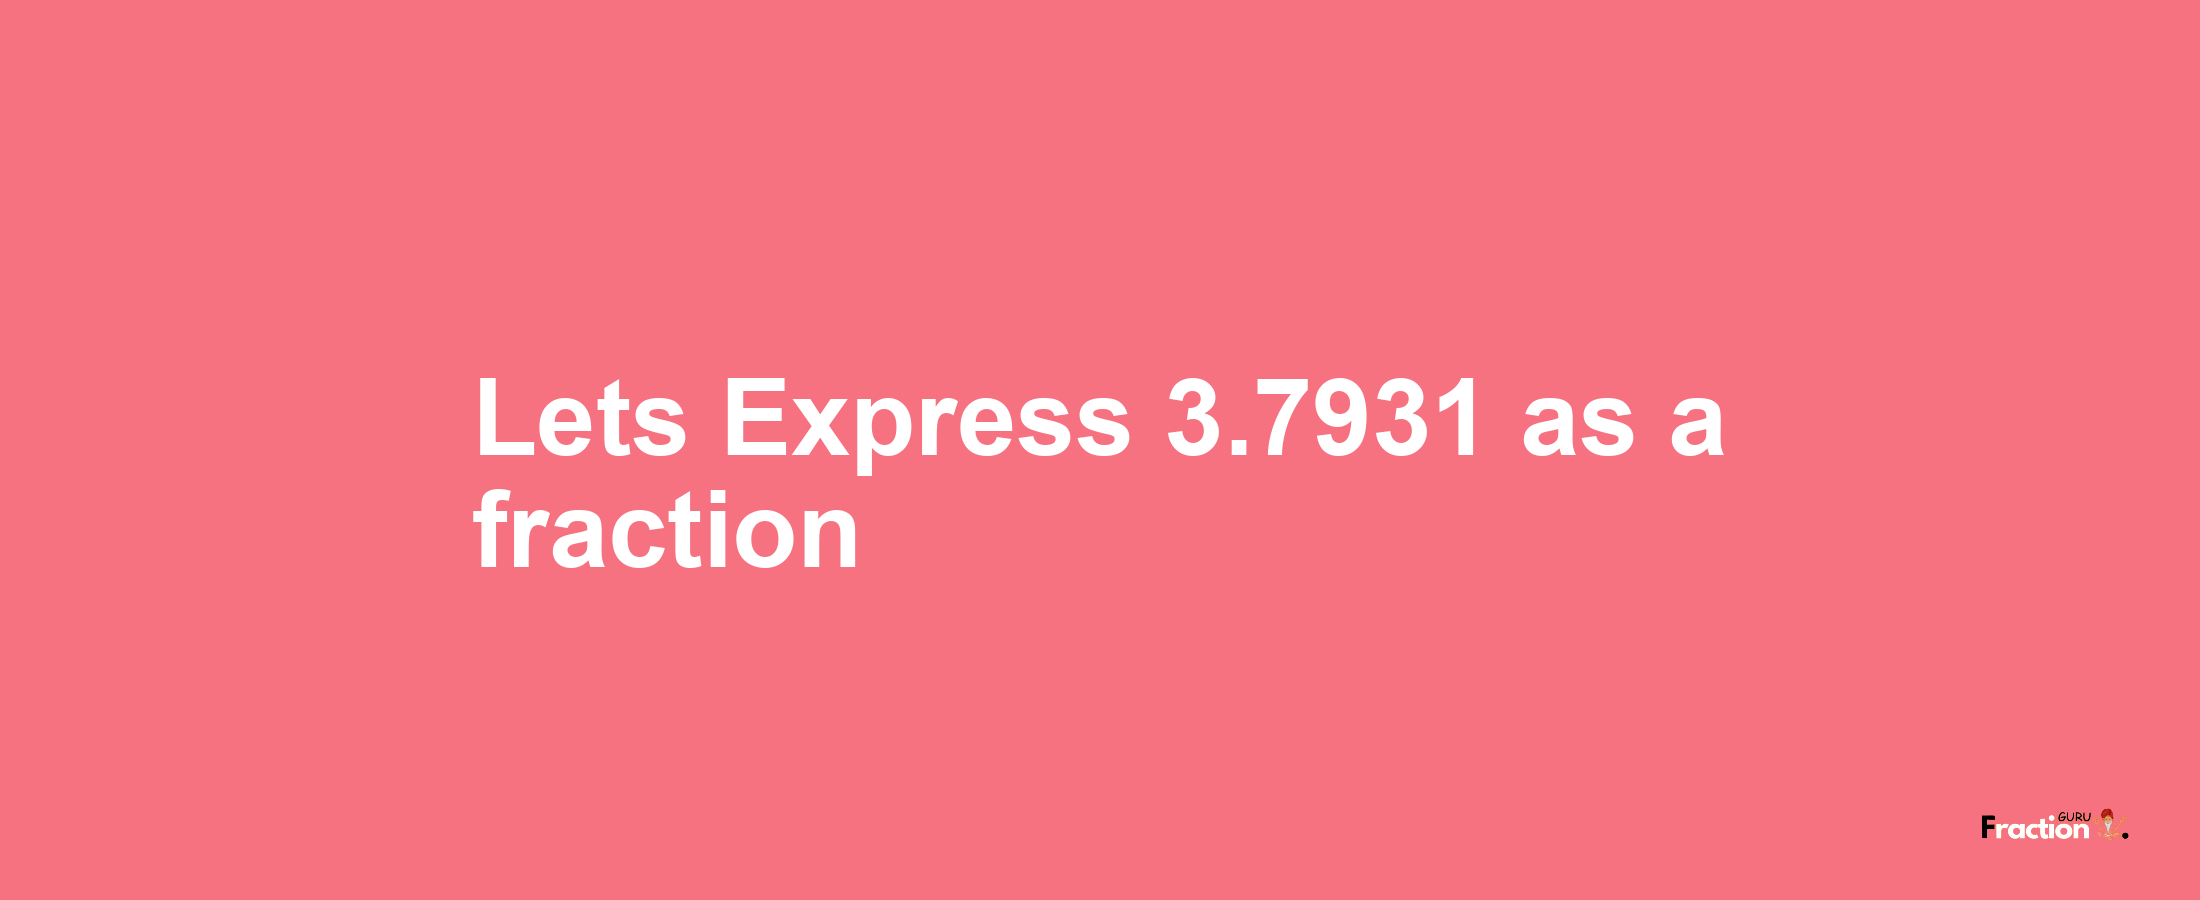 Lets Express 3.7931 as afraction